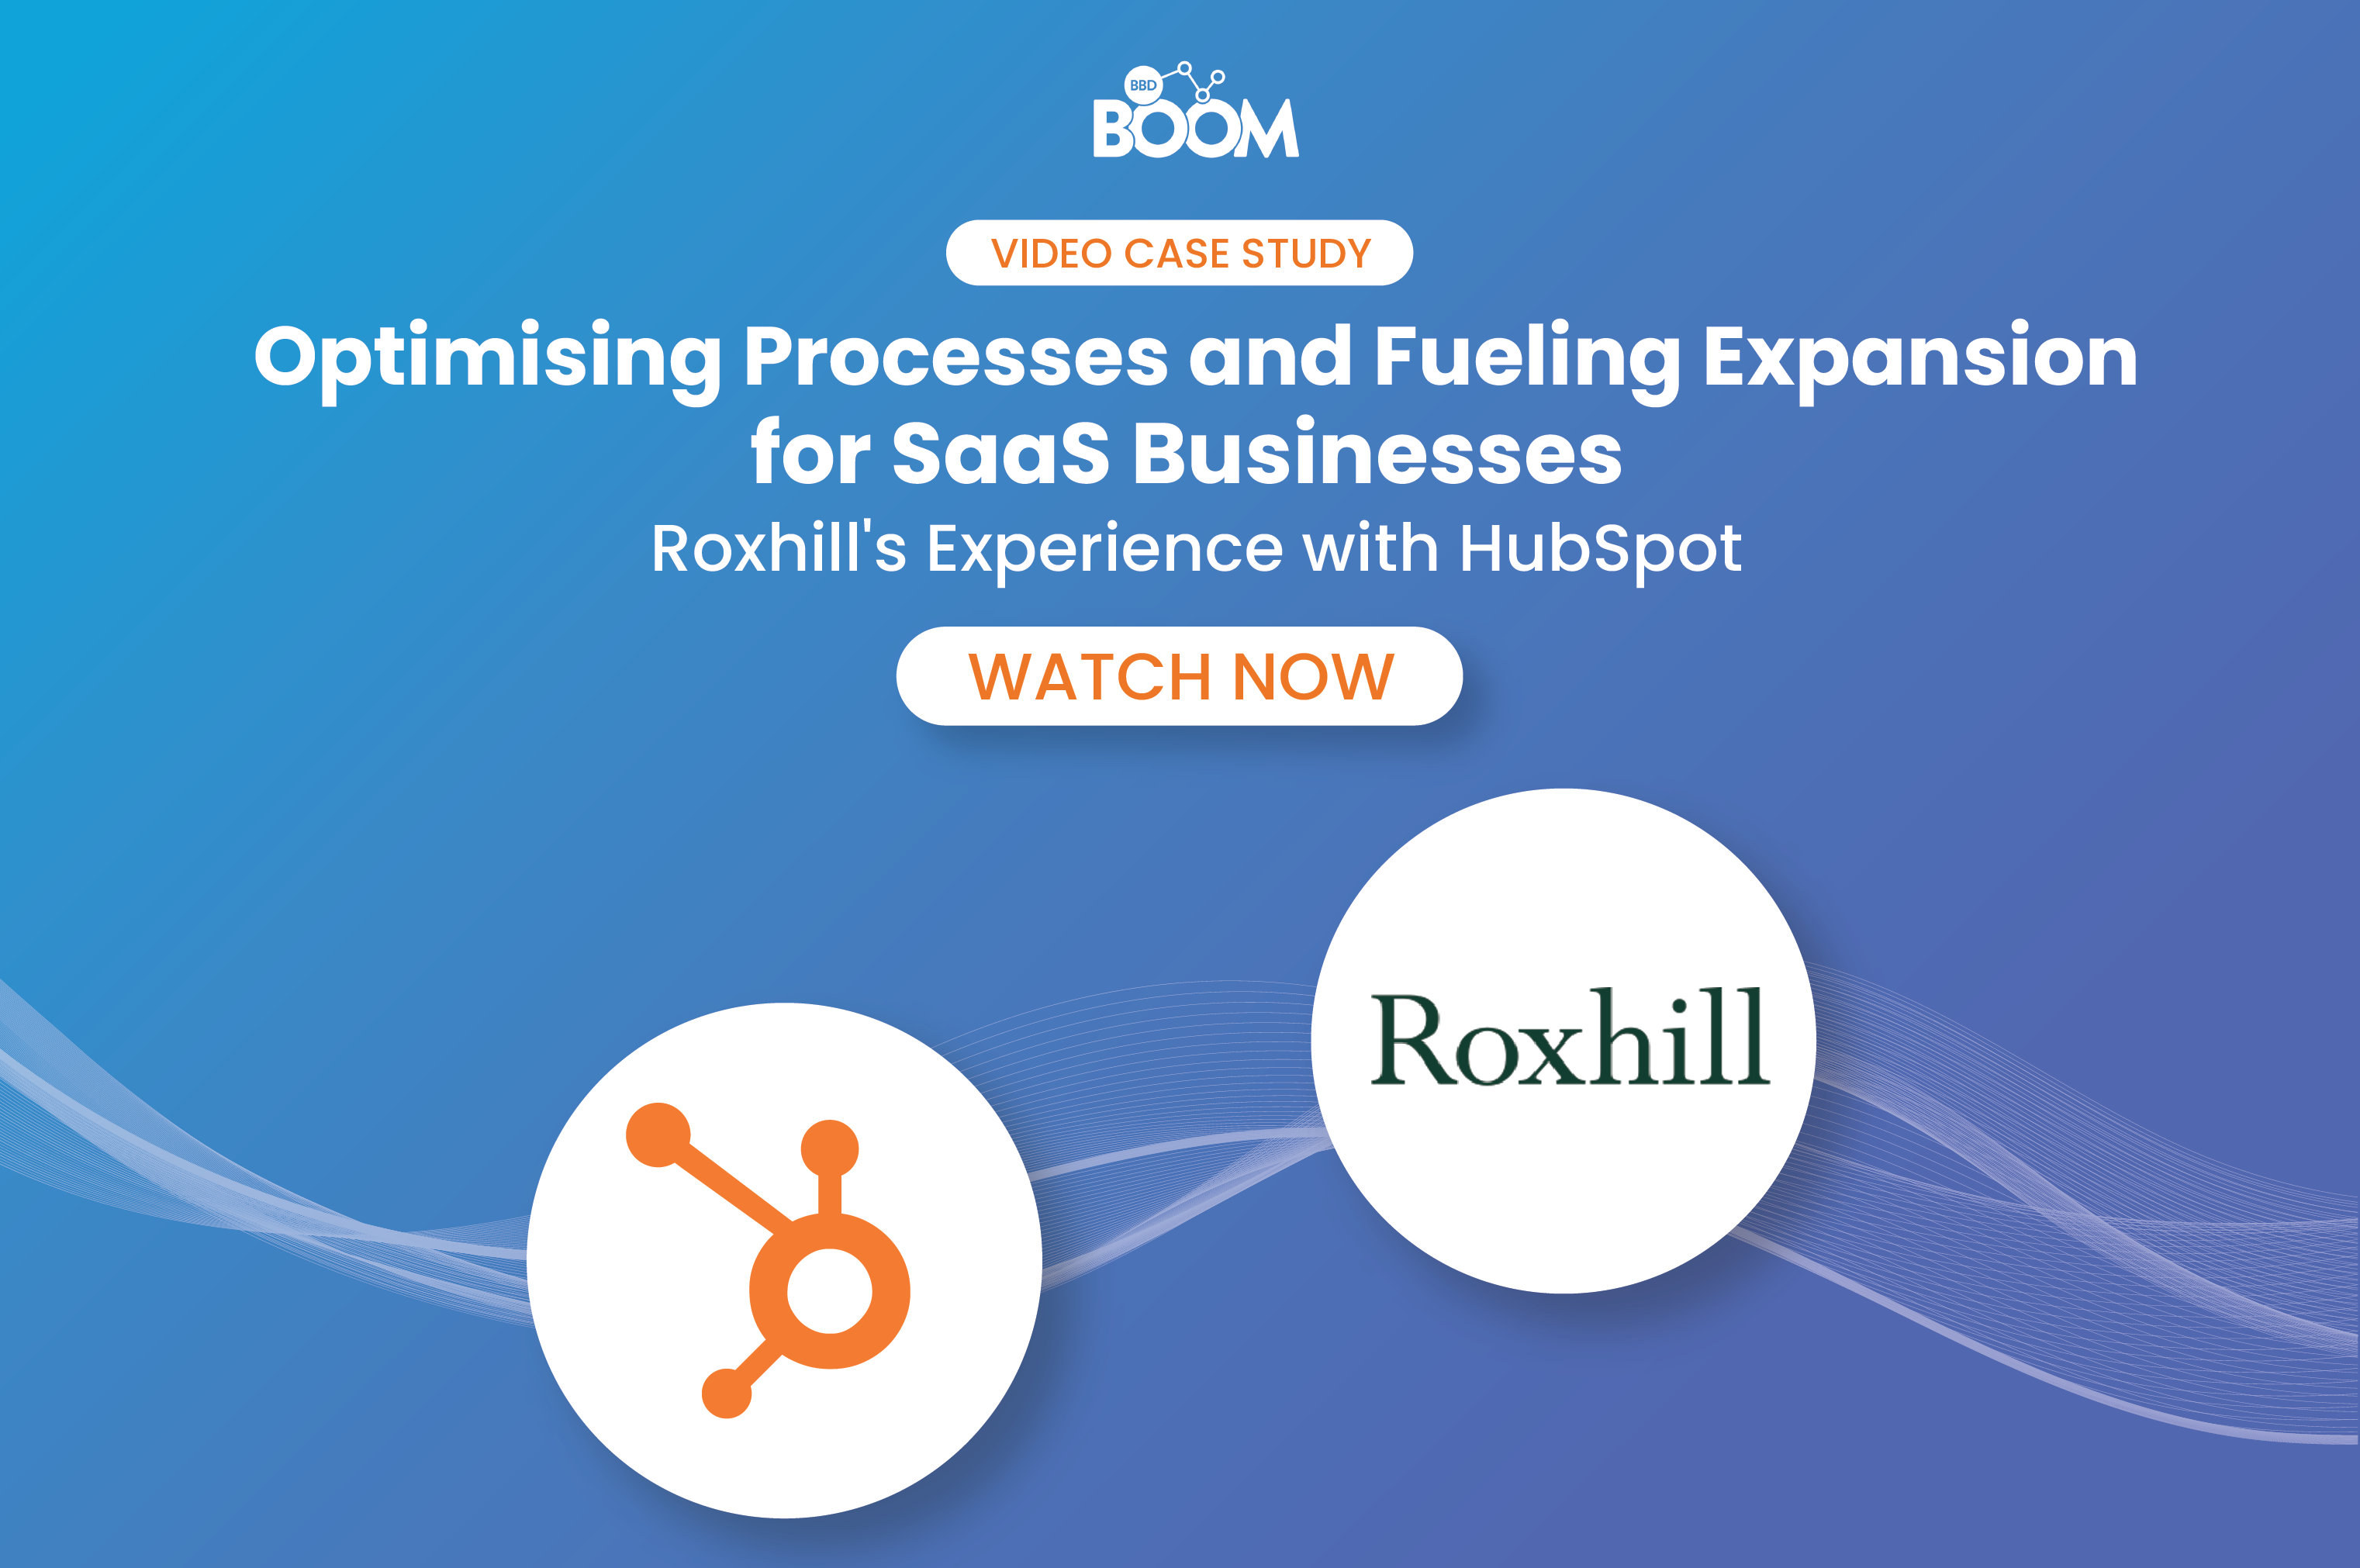 Optimising Processes and Fueling Expansion: Roxhill's Experience with HubSpot